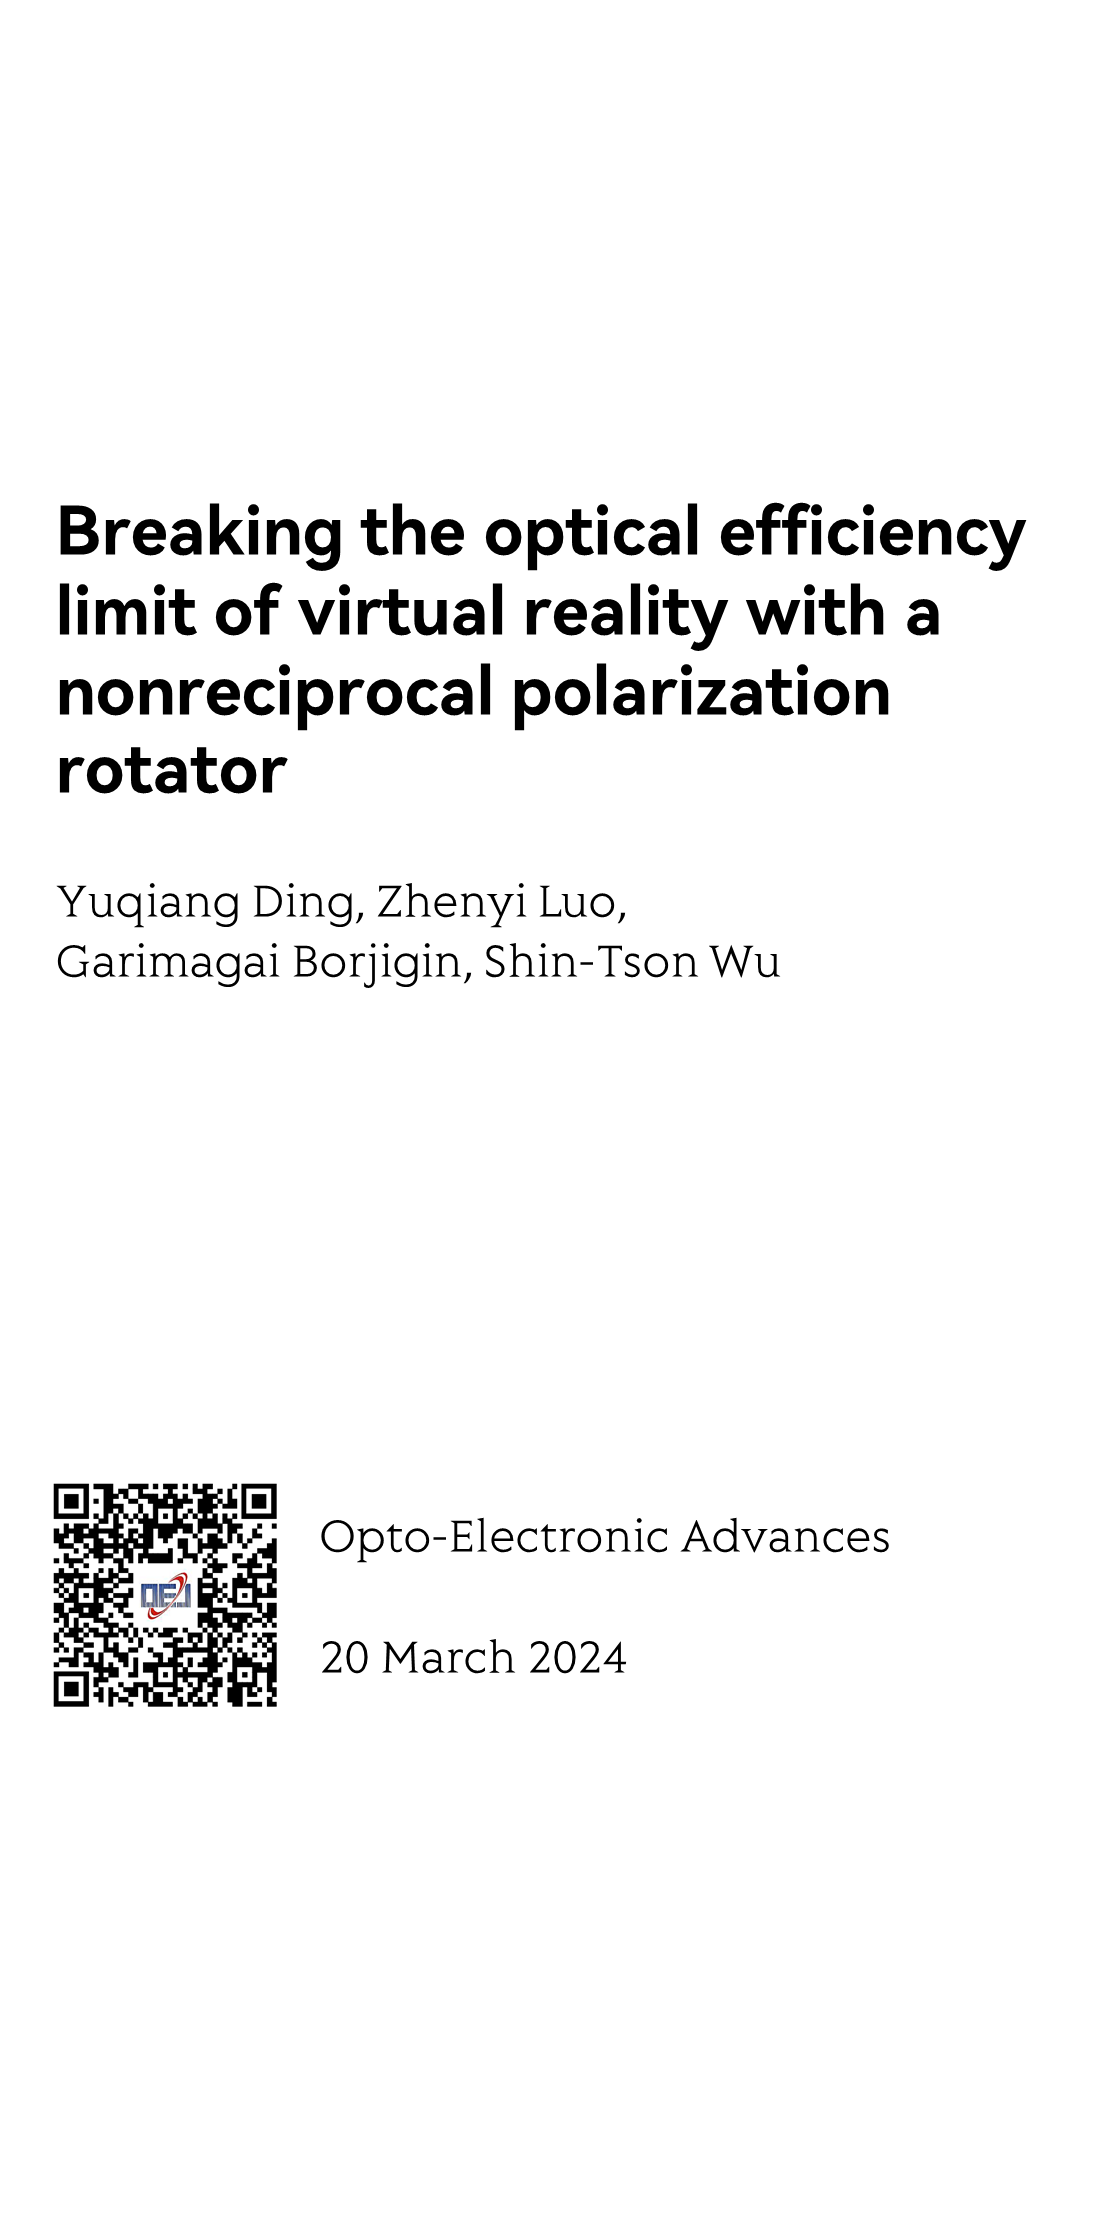 Breaking the optical efficiency limit of virtual reality with a nonreciprocal polarization rotator_1